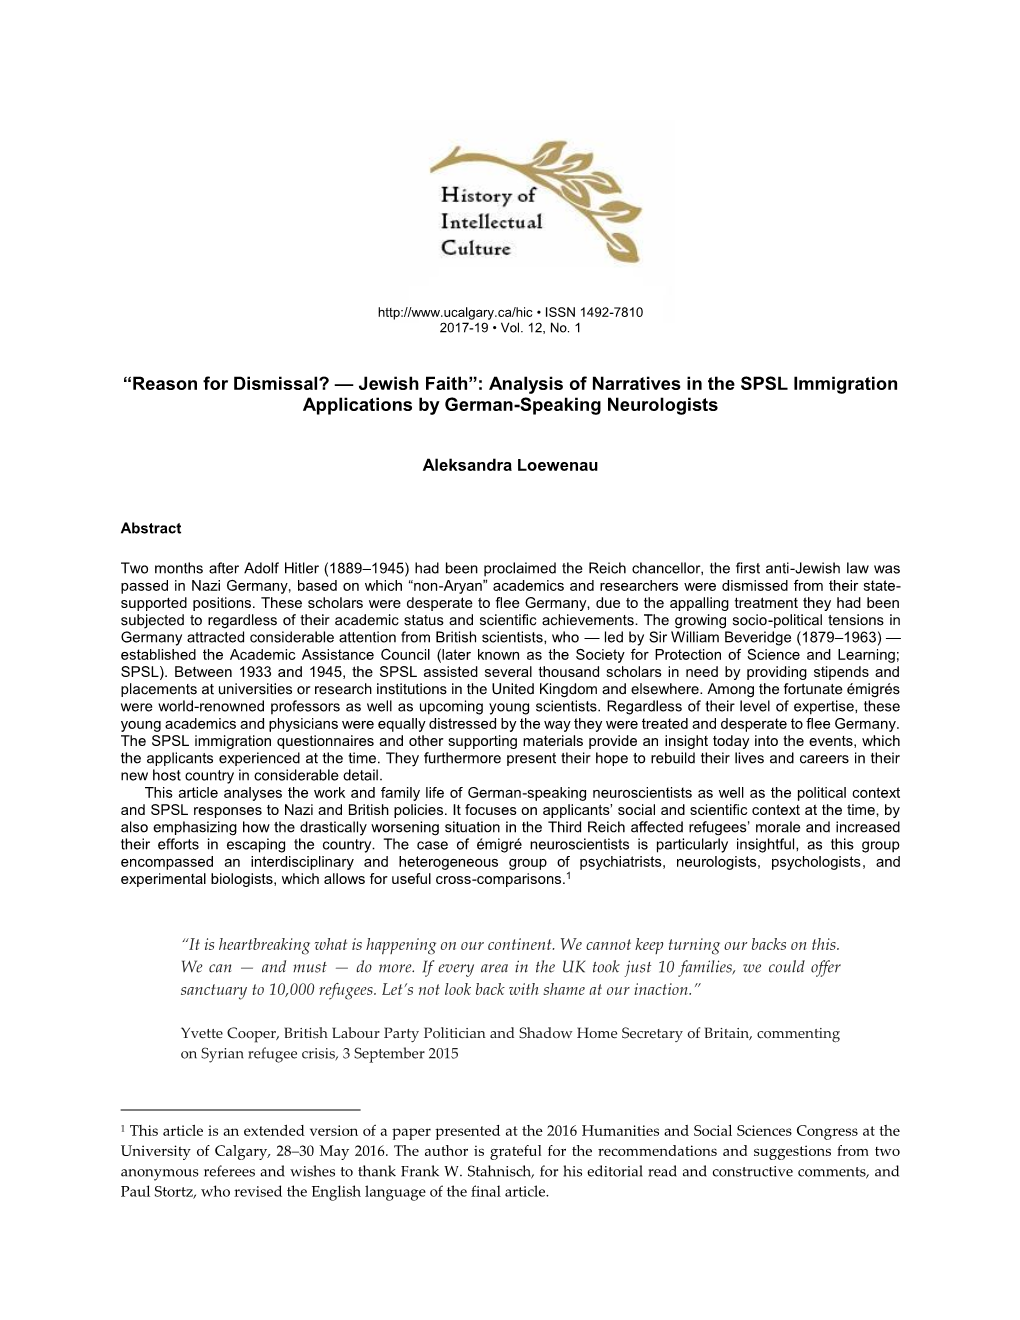 Reason for Dismissal? — Jewish Faith”: Analysis of Narratives in the SPSL Immigration Applications by German-Speaking Neurologists